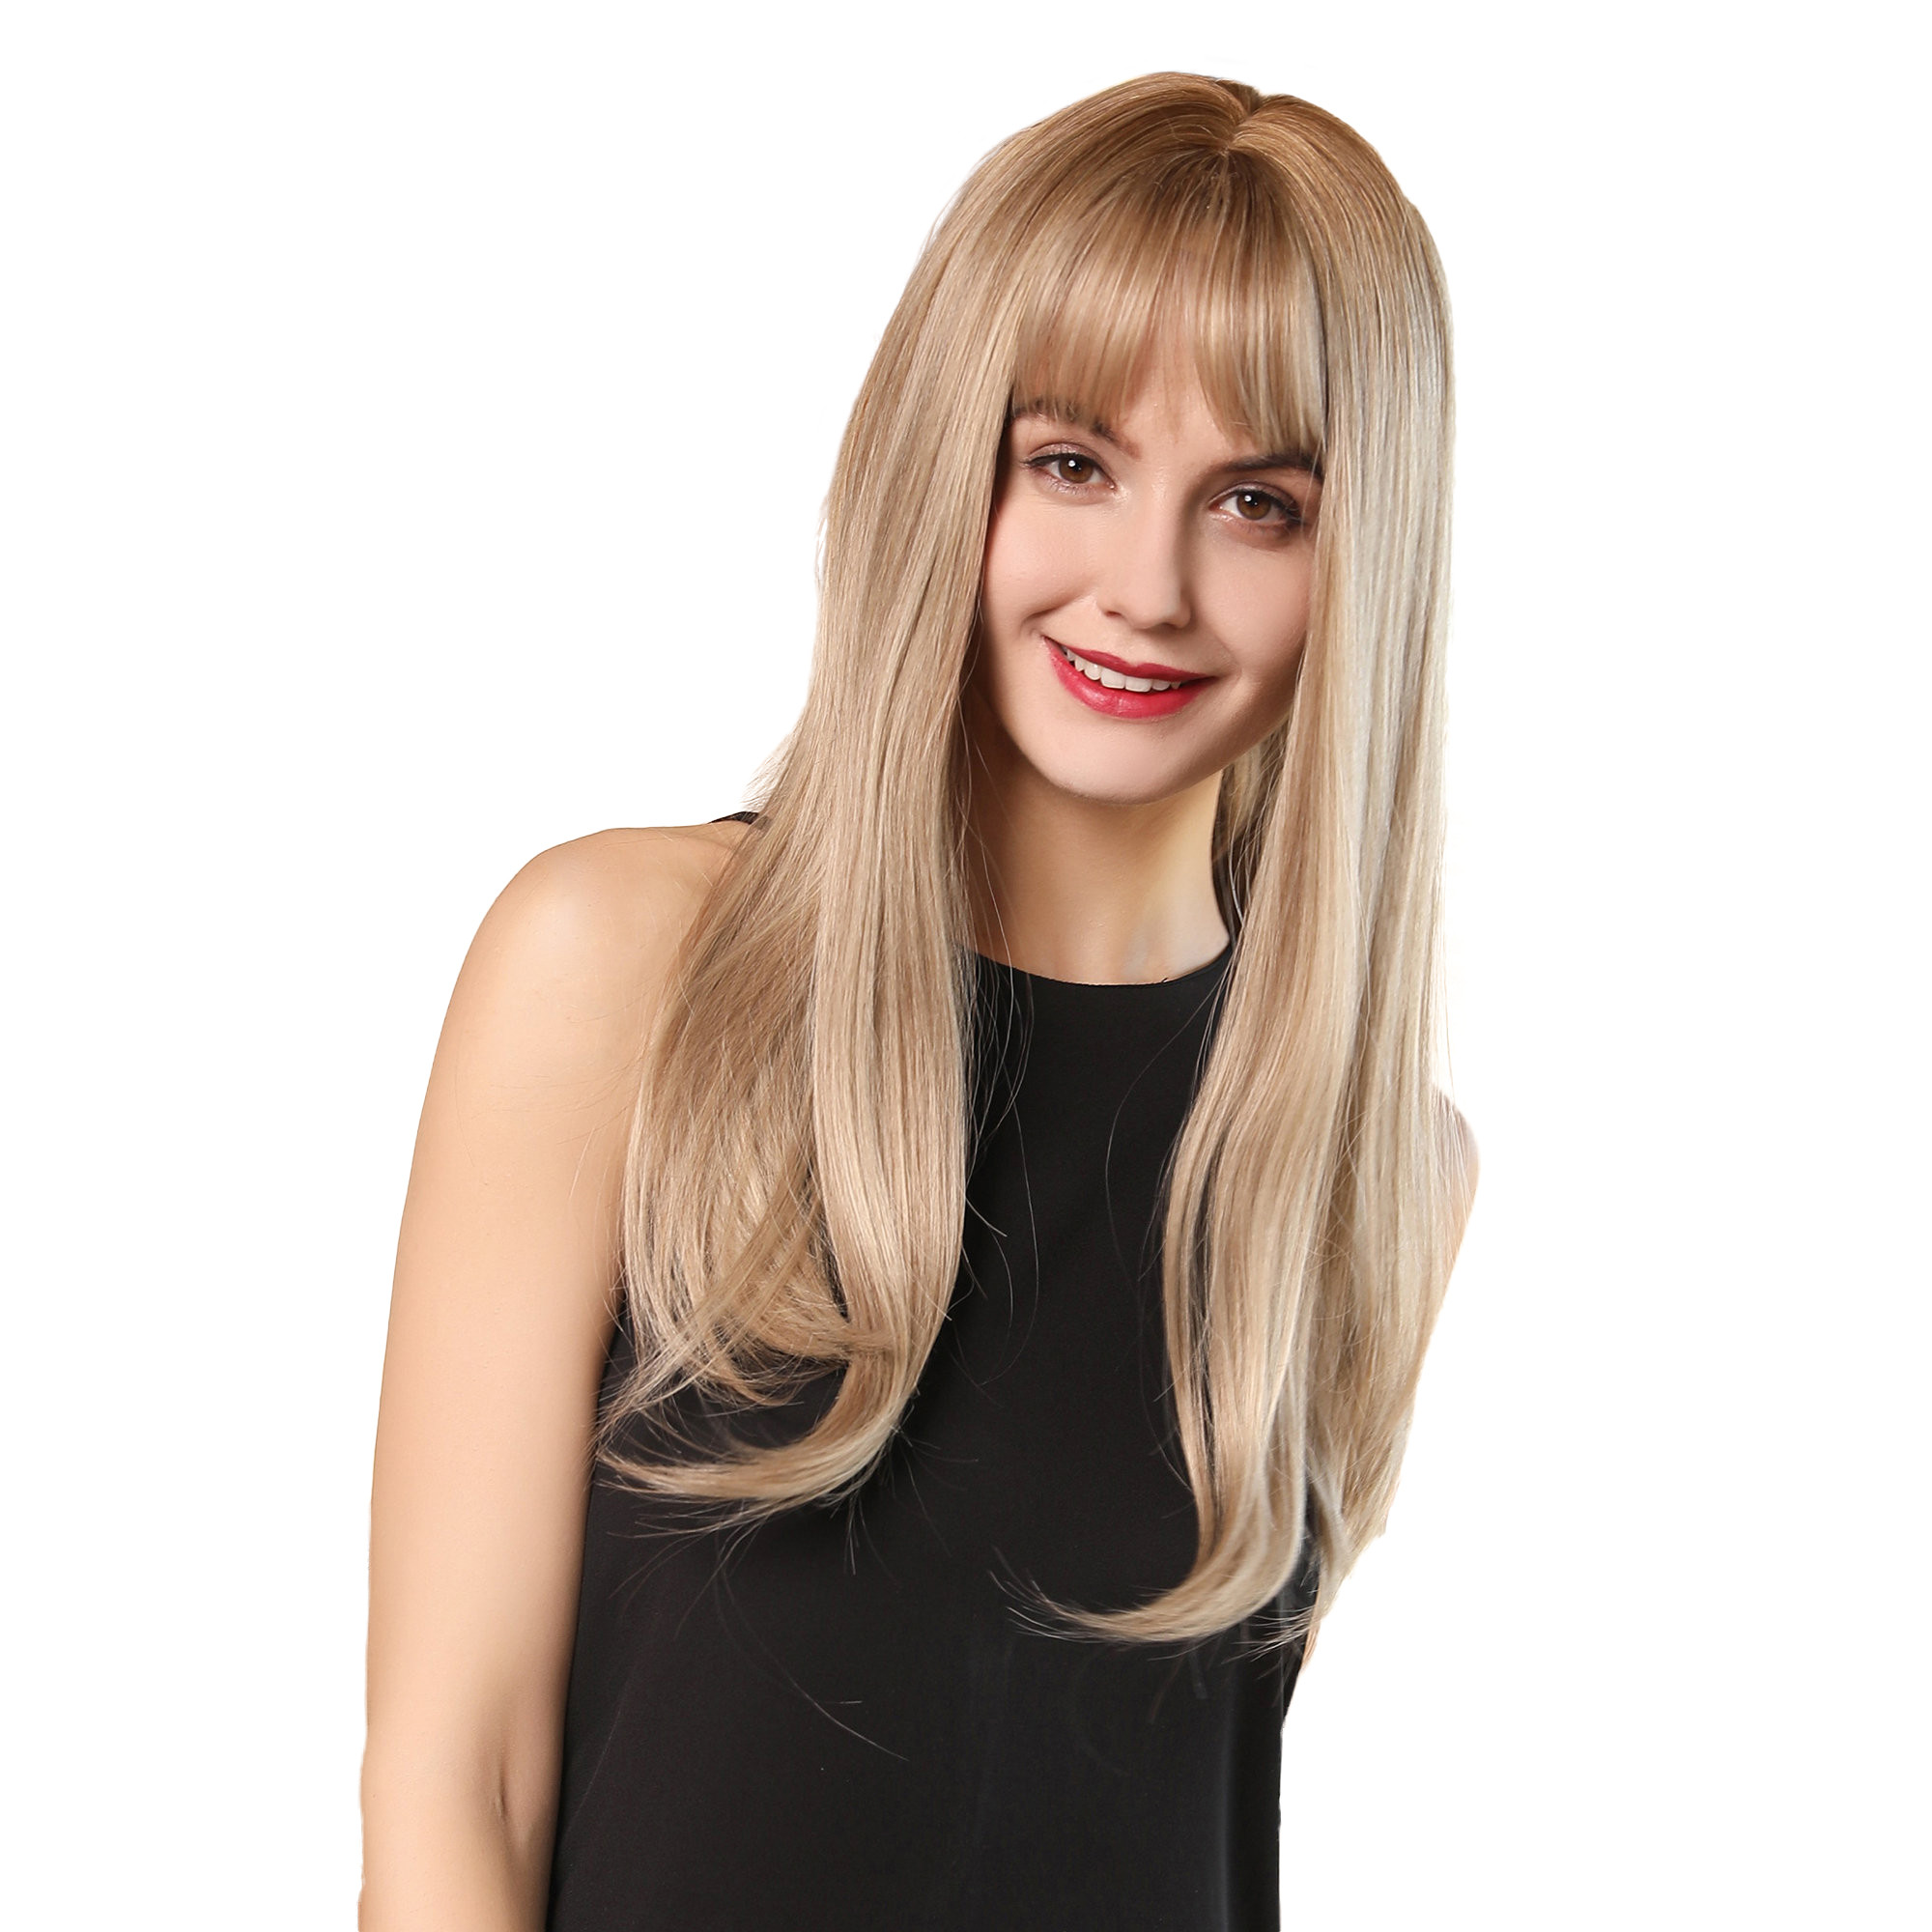 Women's Long Length Blonde Color Synthetic Hair Wigs 130% Density Rose Net Capless Wigs 24Inches